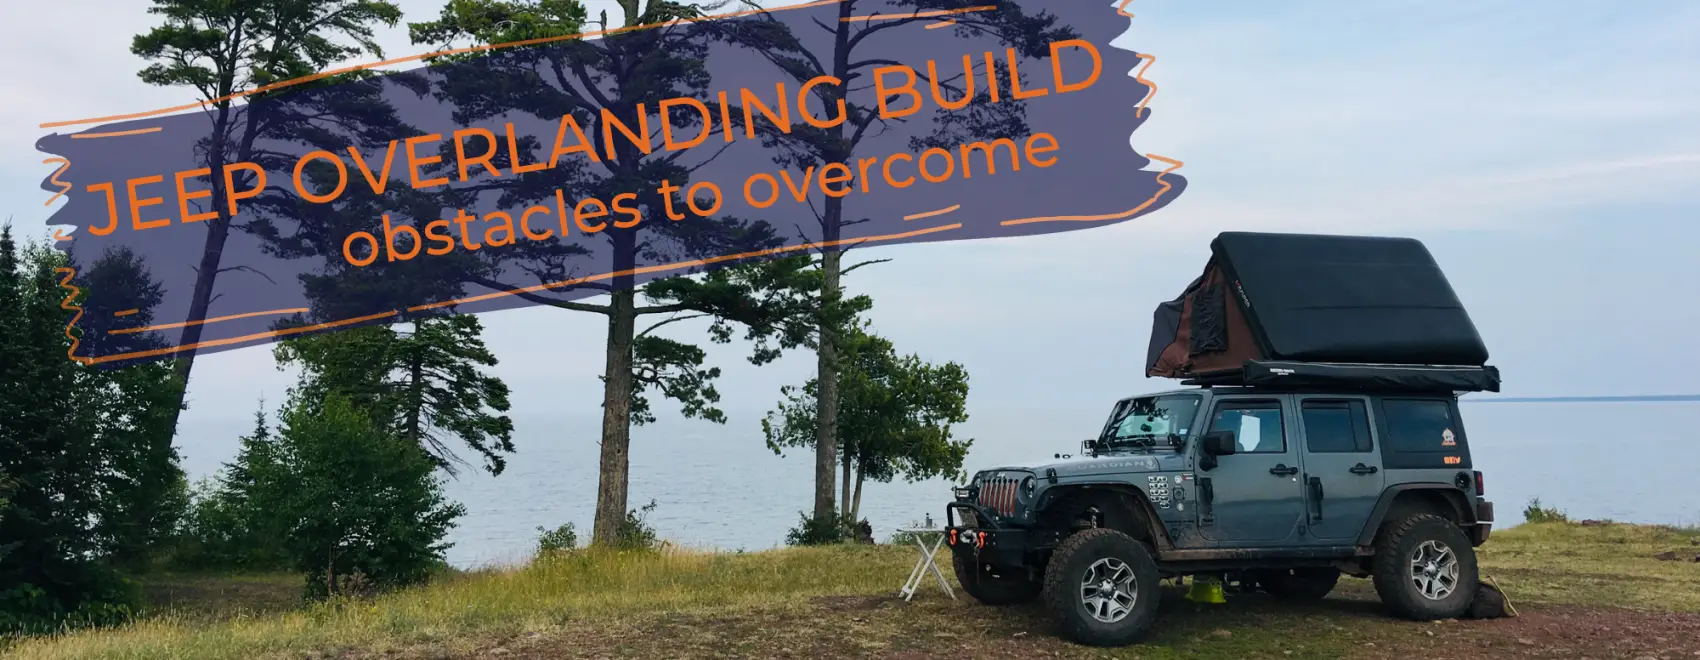 Jeep Overlanding Build Obstacles to Overcome